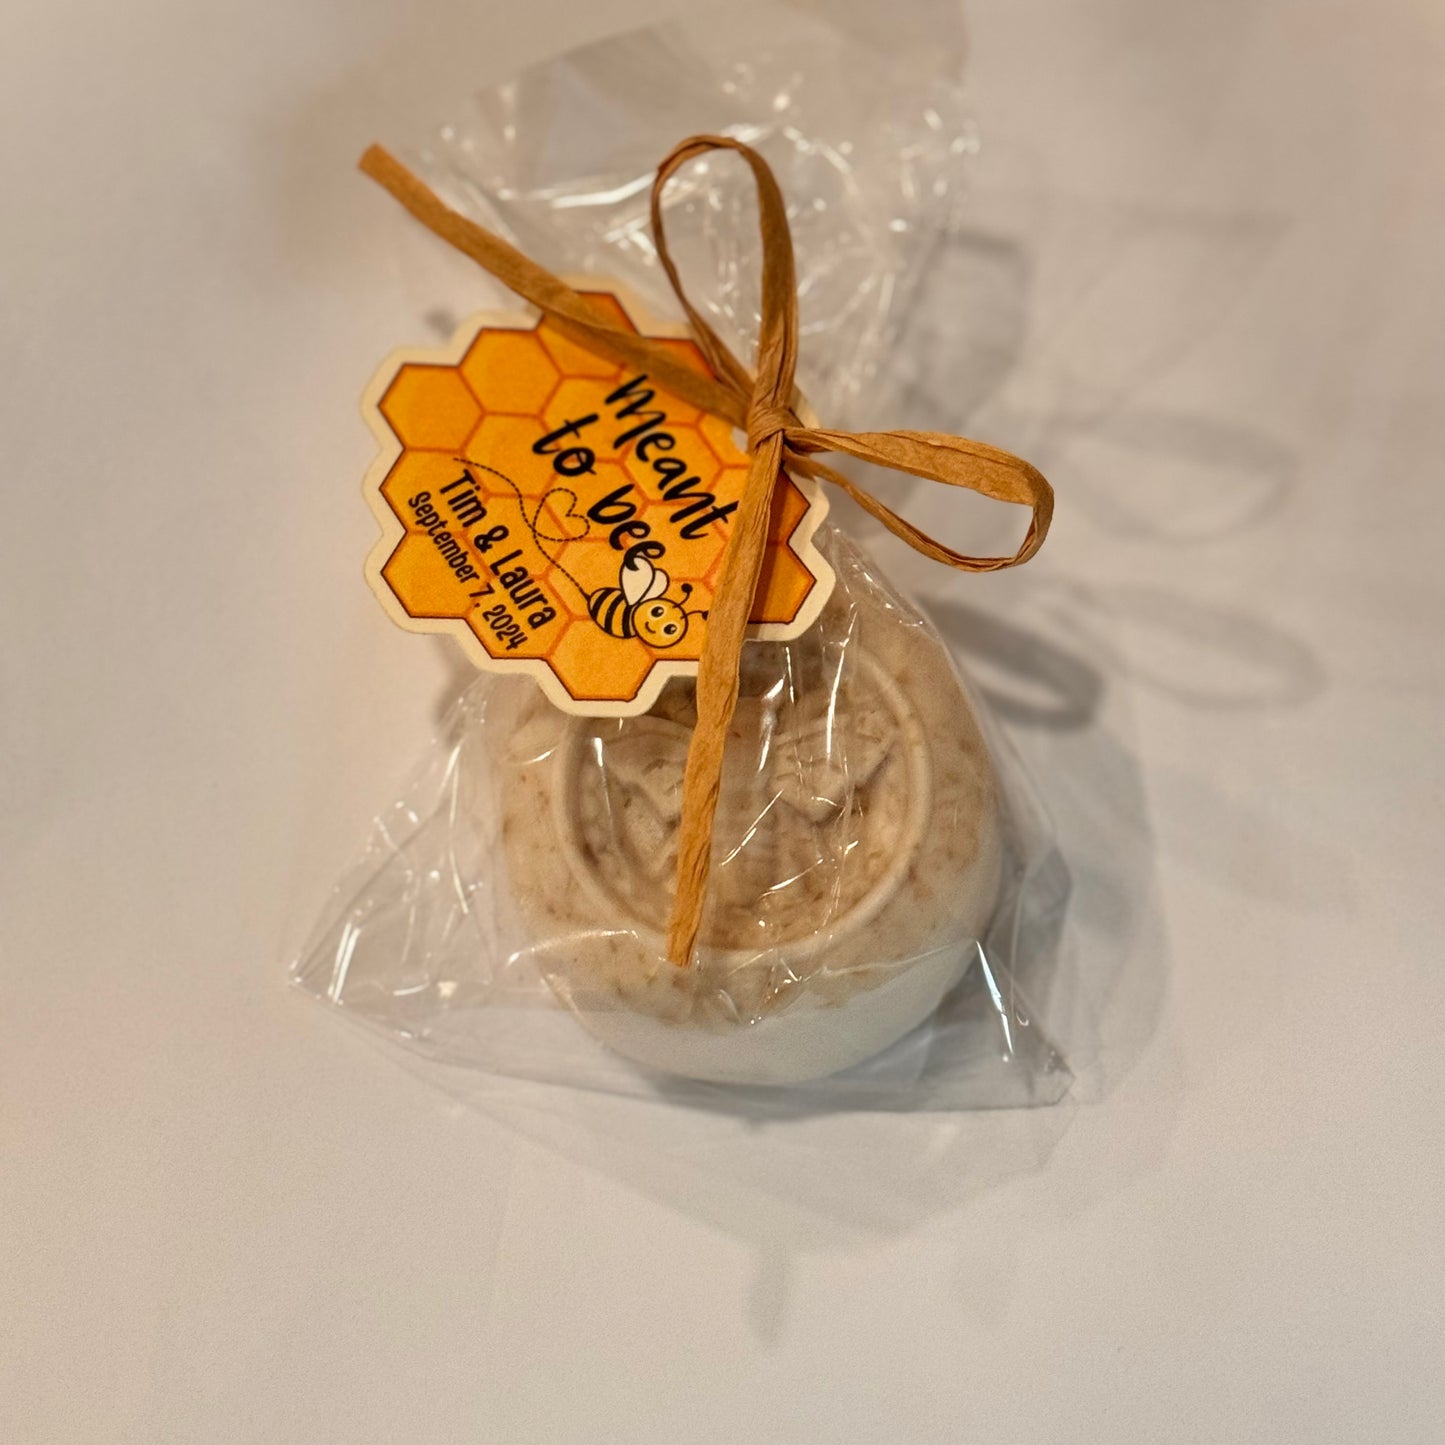 Oatmeal Milk Honey Bee Soap Party Favors | Party Gifts for guests at Bridal Showers, Tea Parties, Sweet 16, Quinceanera | Meant to Bee